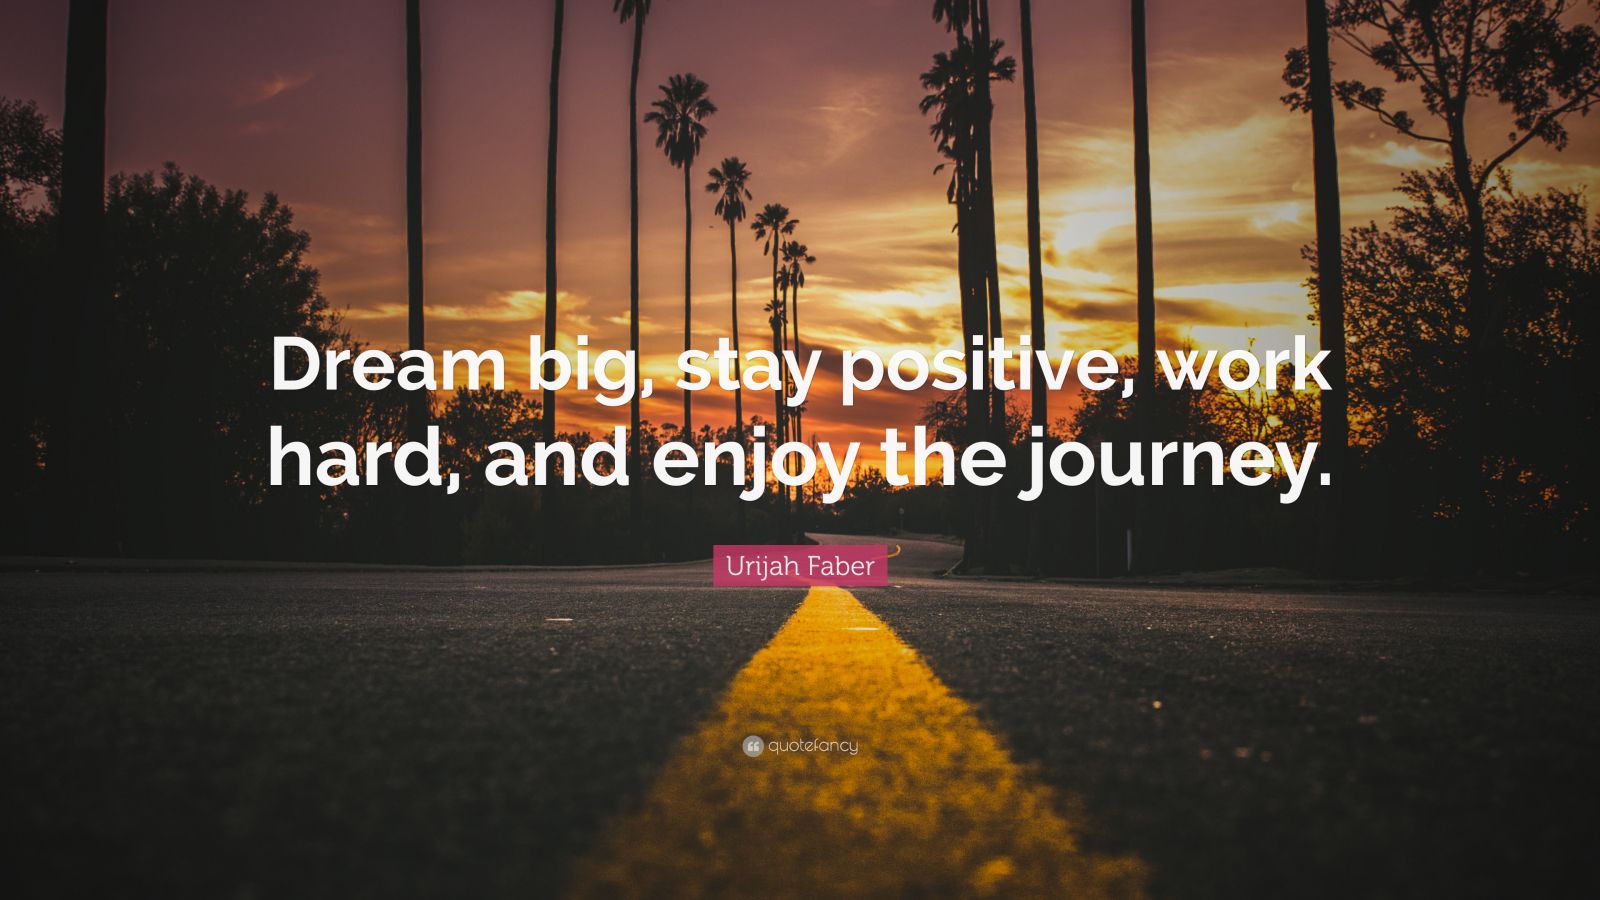 Urijah Faber Quote: “Dream big, stay positive, work hard, and enjoy the